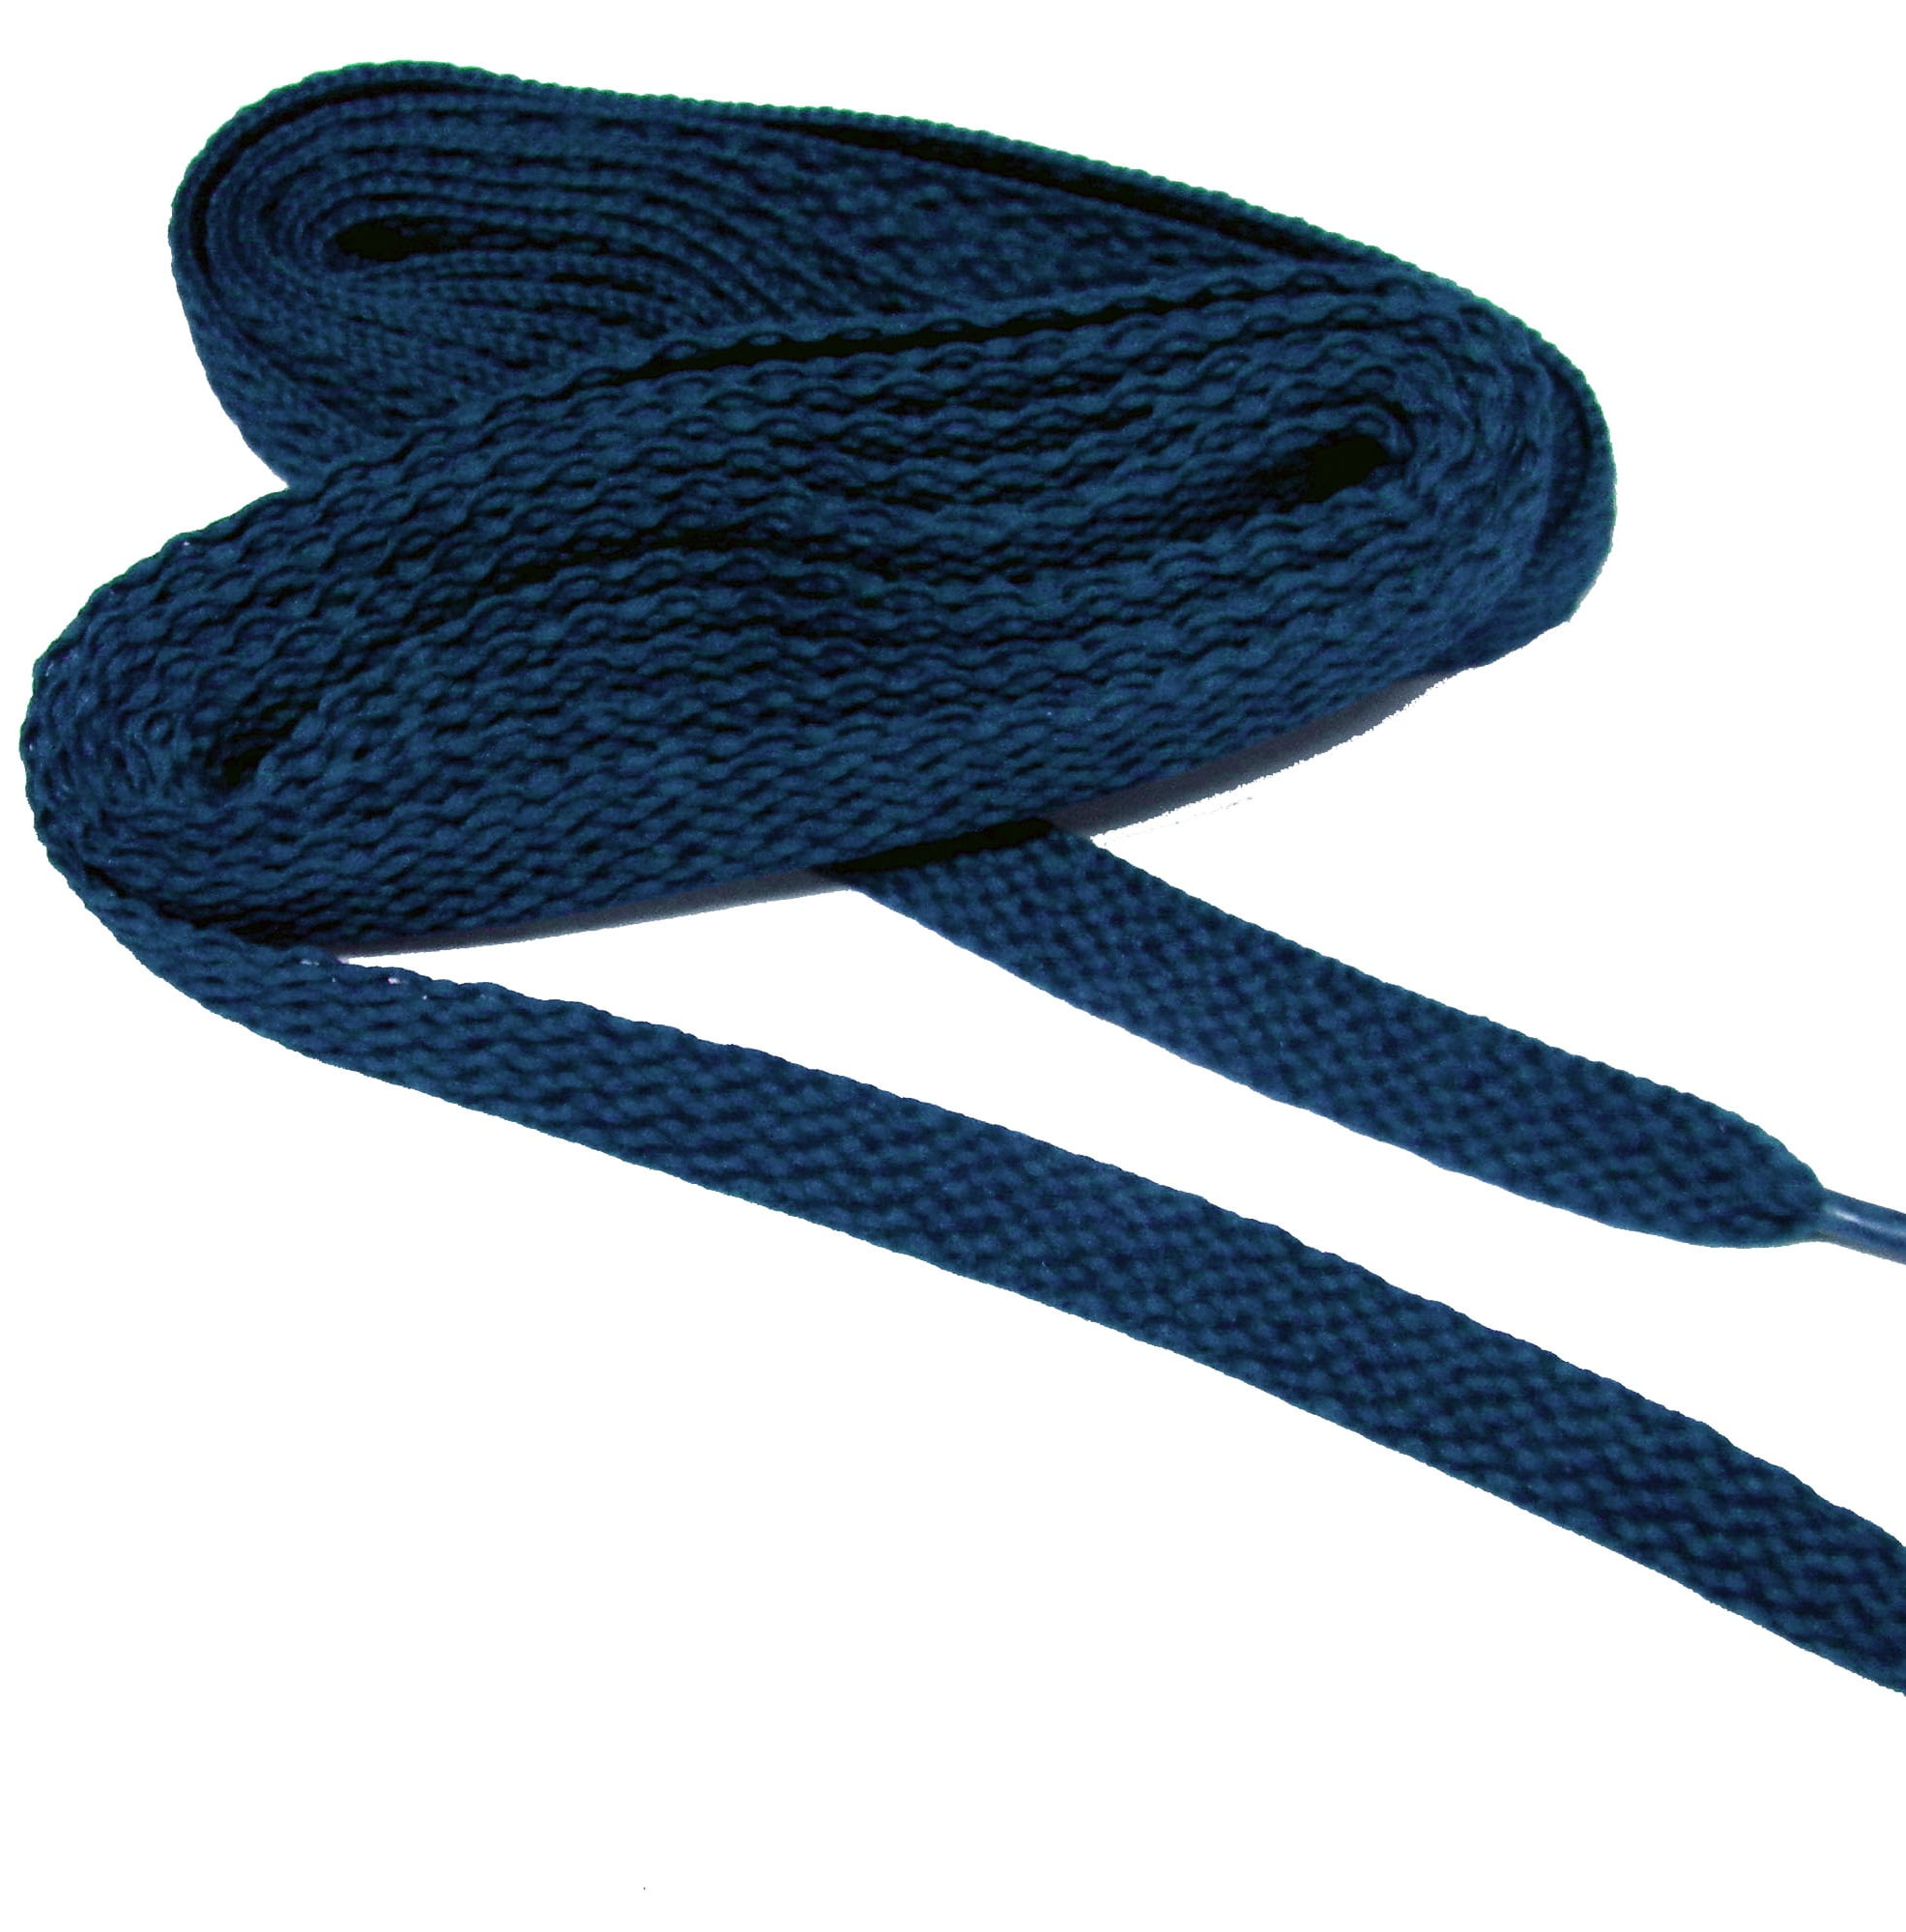 Sport Athletic Sneakers String "Navy Blue" Shoelaces Oval 36",45" 